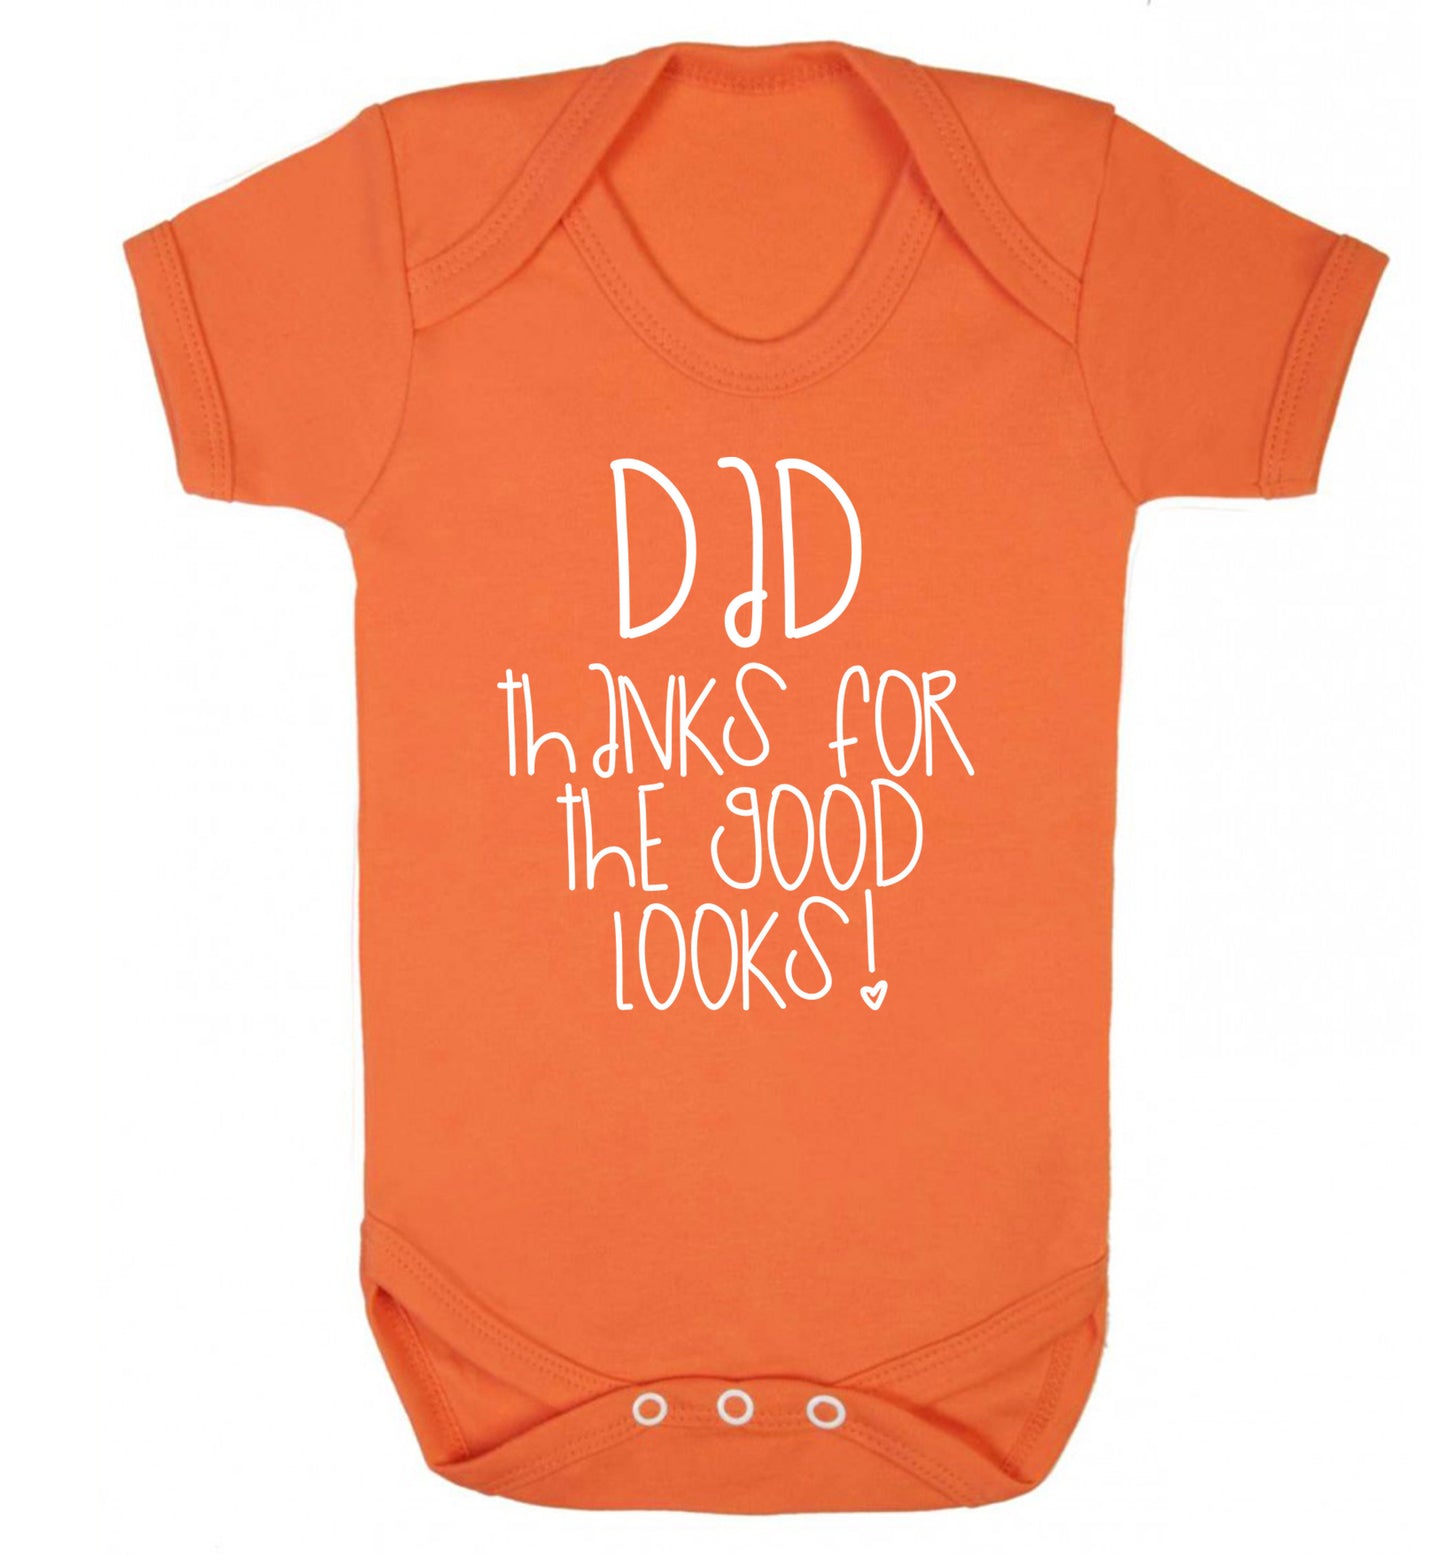 Dad thanks for the good looks Baby Vest orange 18-24 months